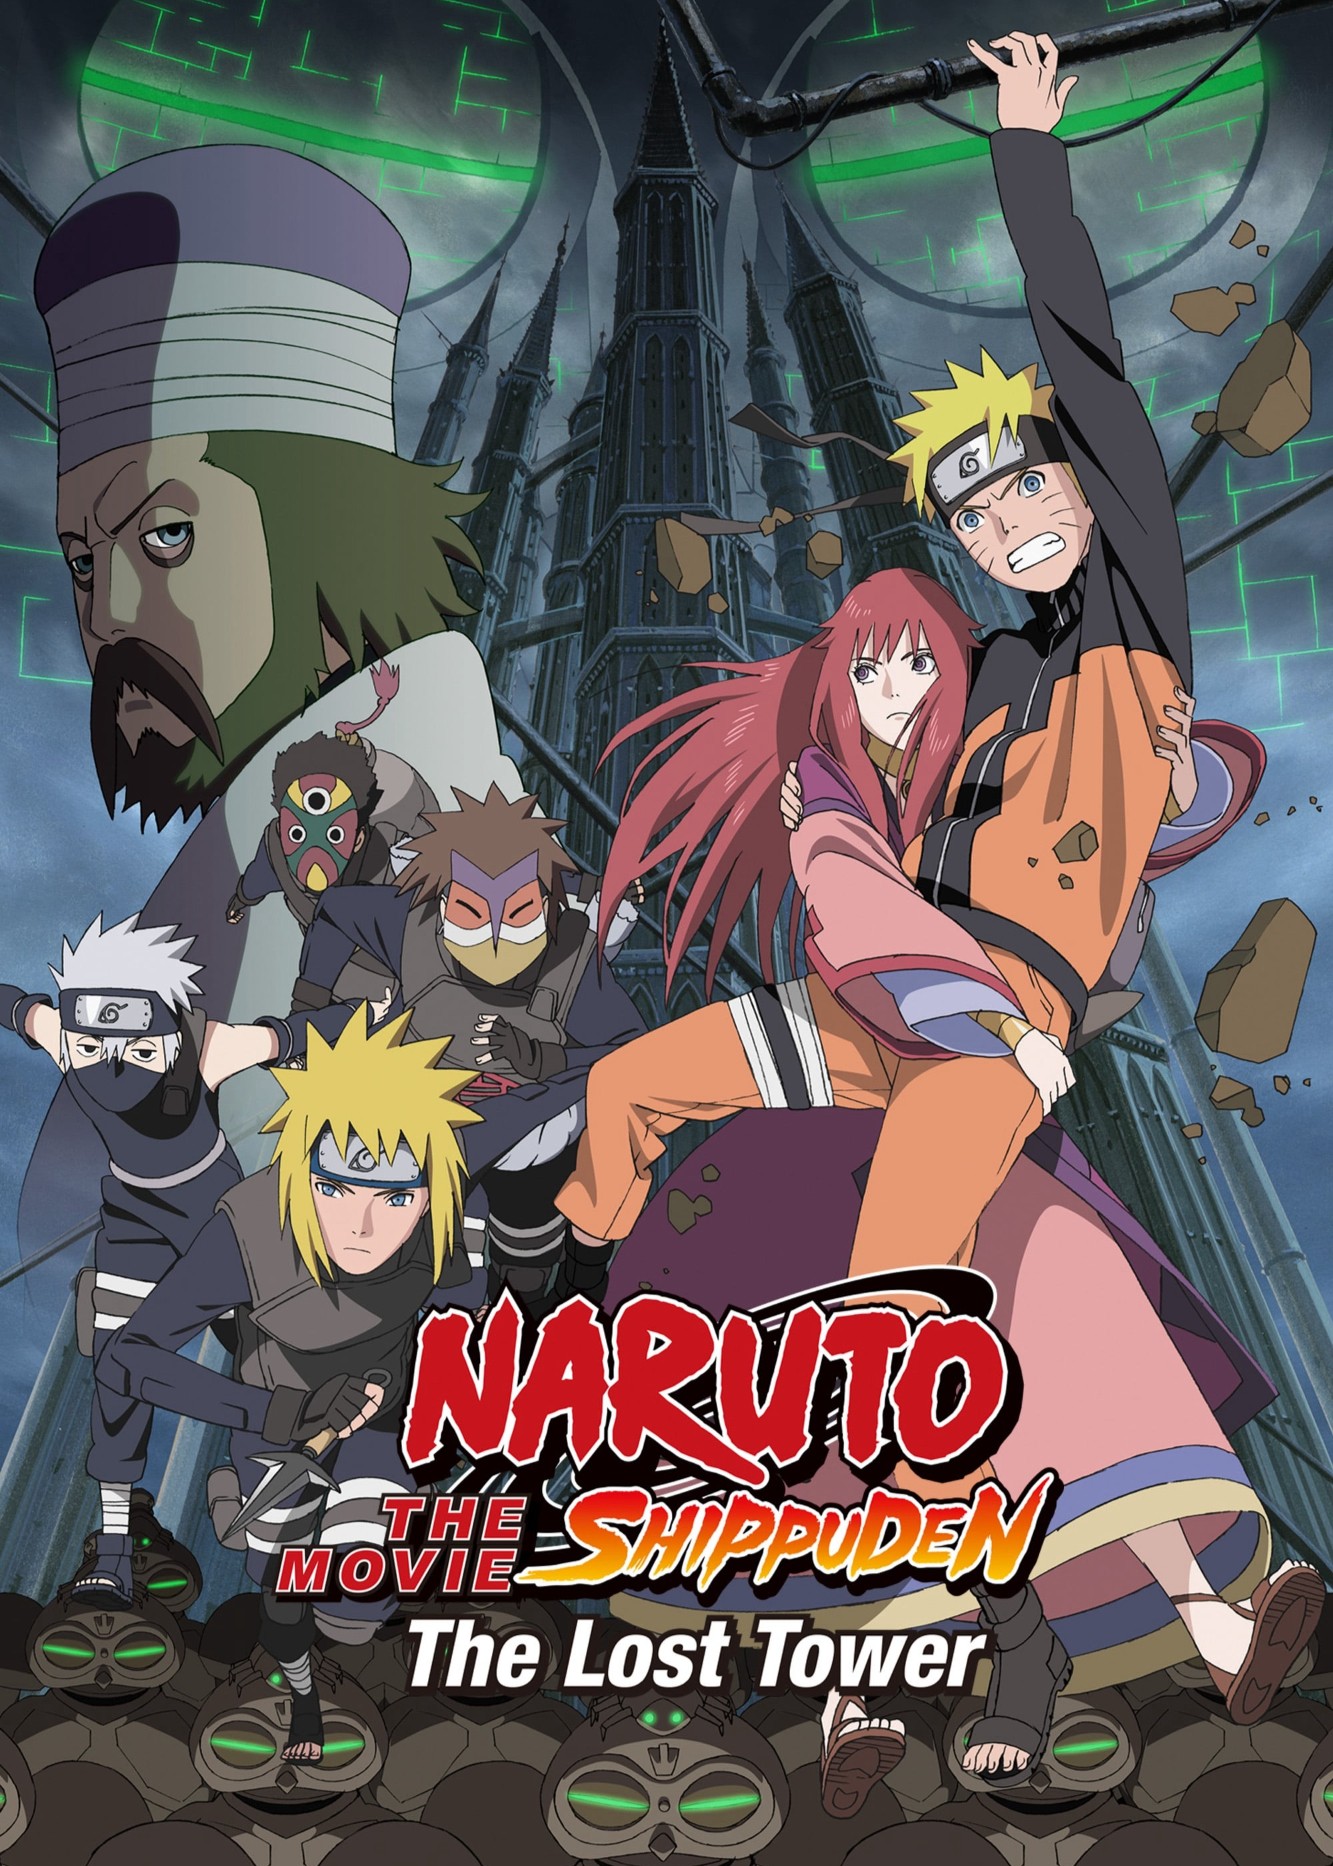 Naruto Shippuden: The Lost Tower (Naruto Shippuden: The Lost Tower) [2010]